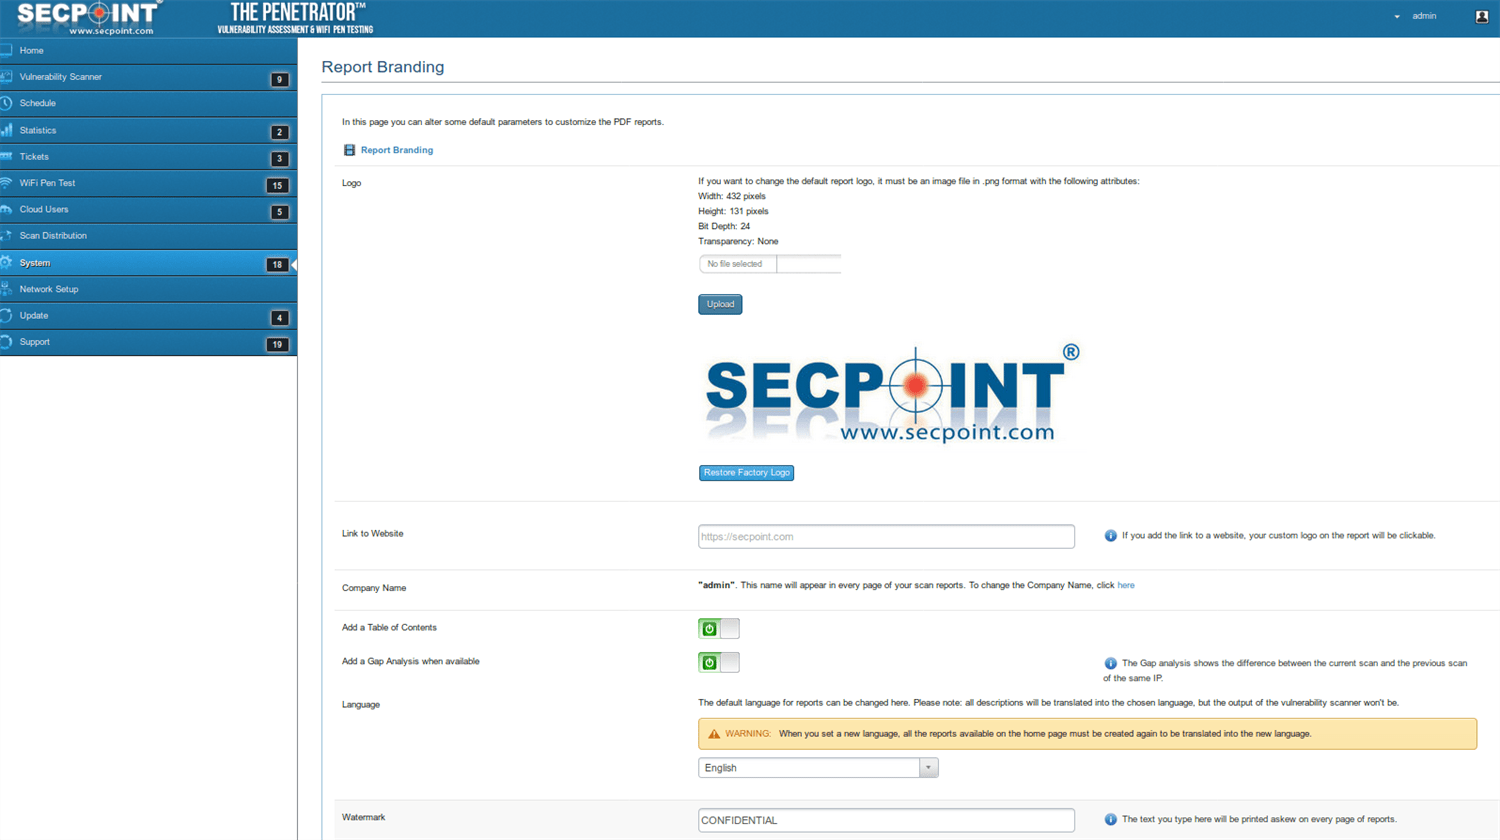 SecPoint Penetrator S9 - 128 IP Concurrent Scan License Vulnerability Scanner (1 Year License) - SecPoint